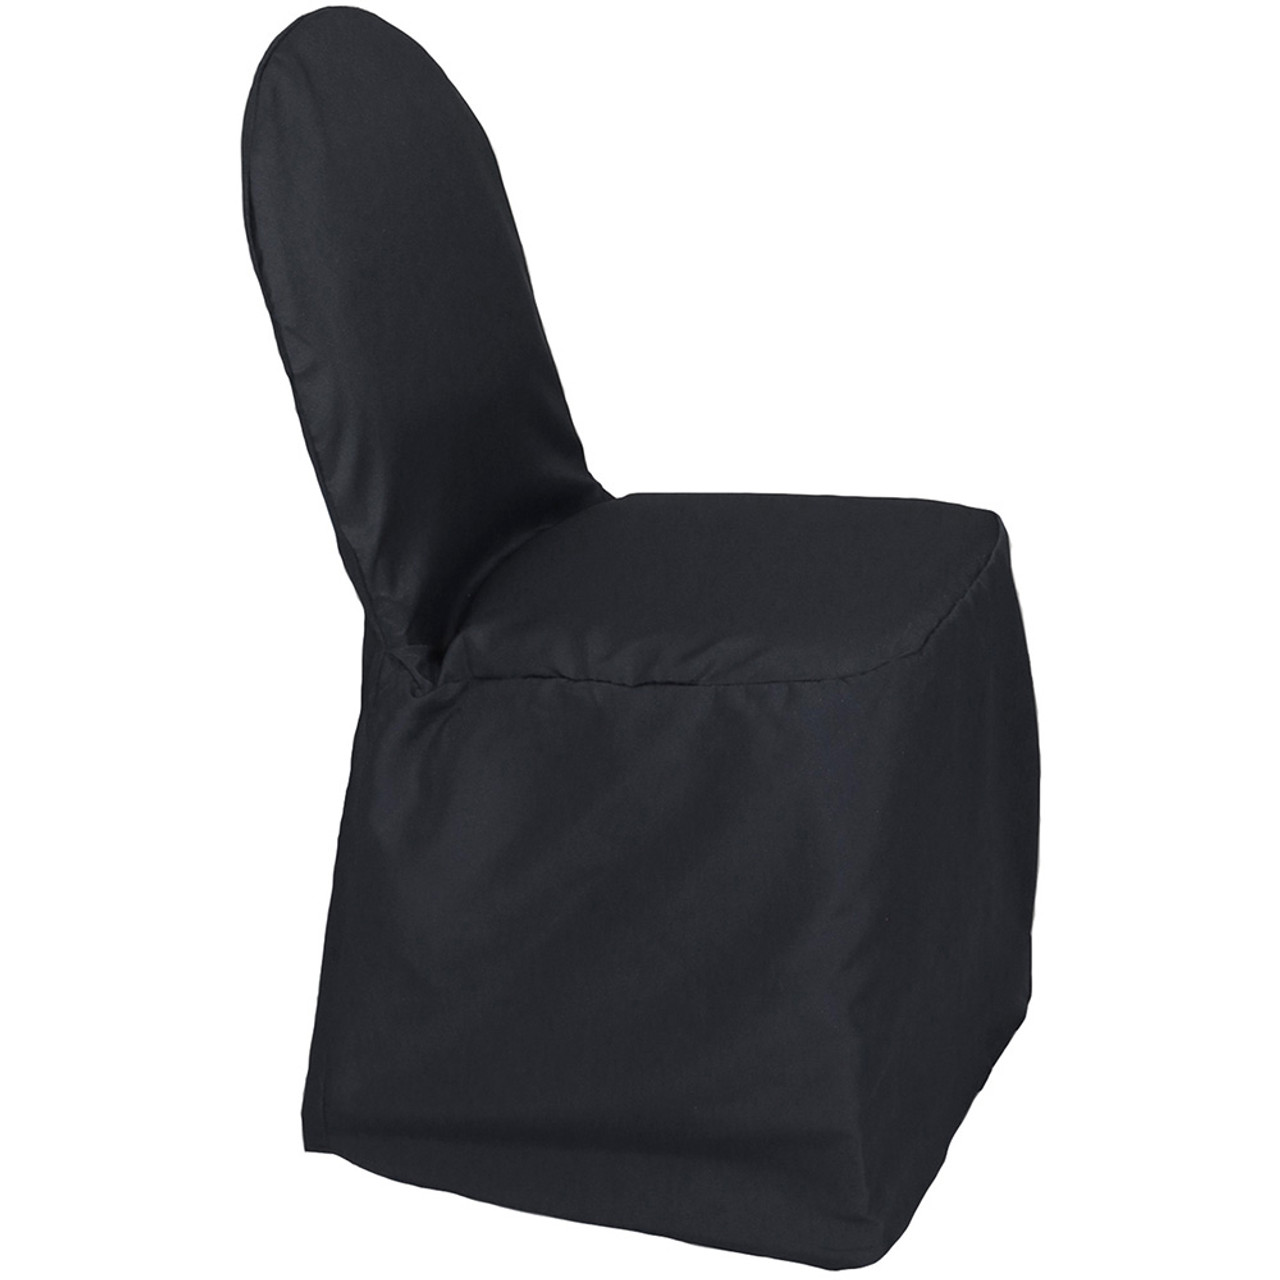 Polyester Chair Cover Black Your Chair Covers Inc